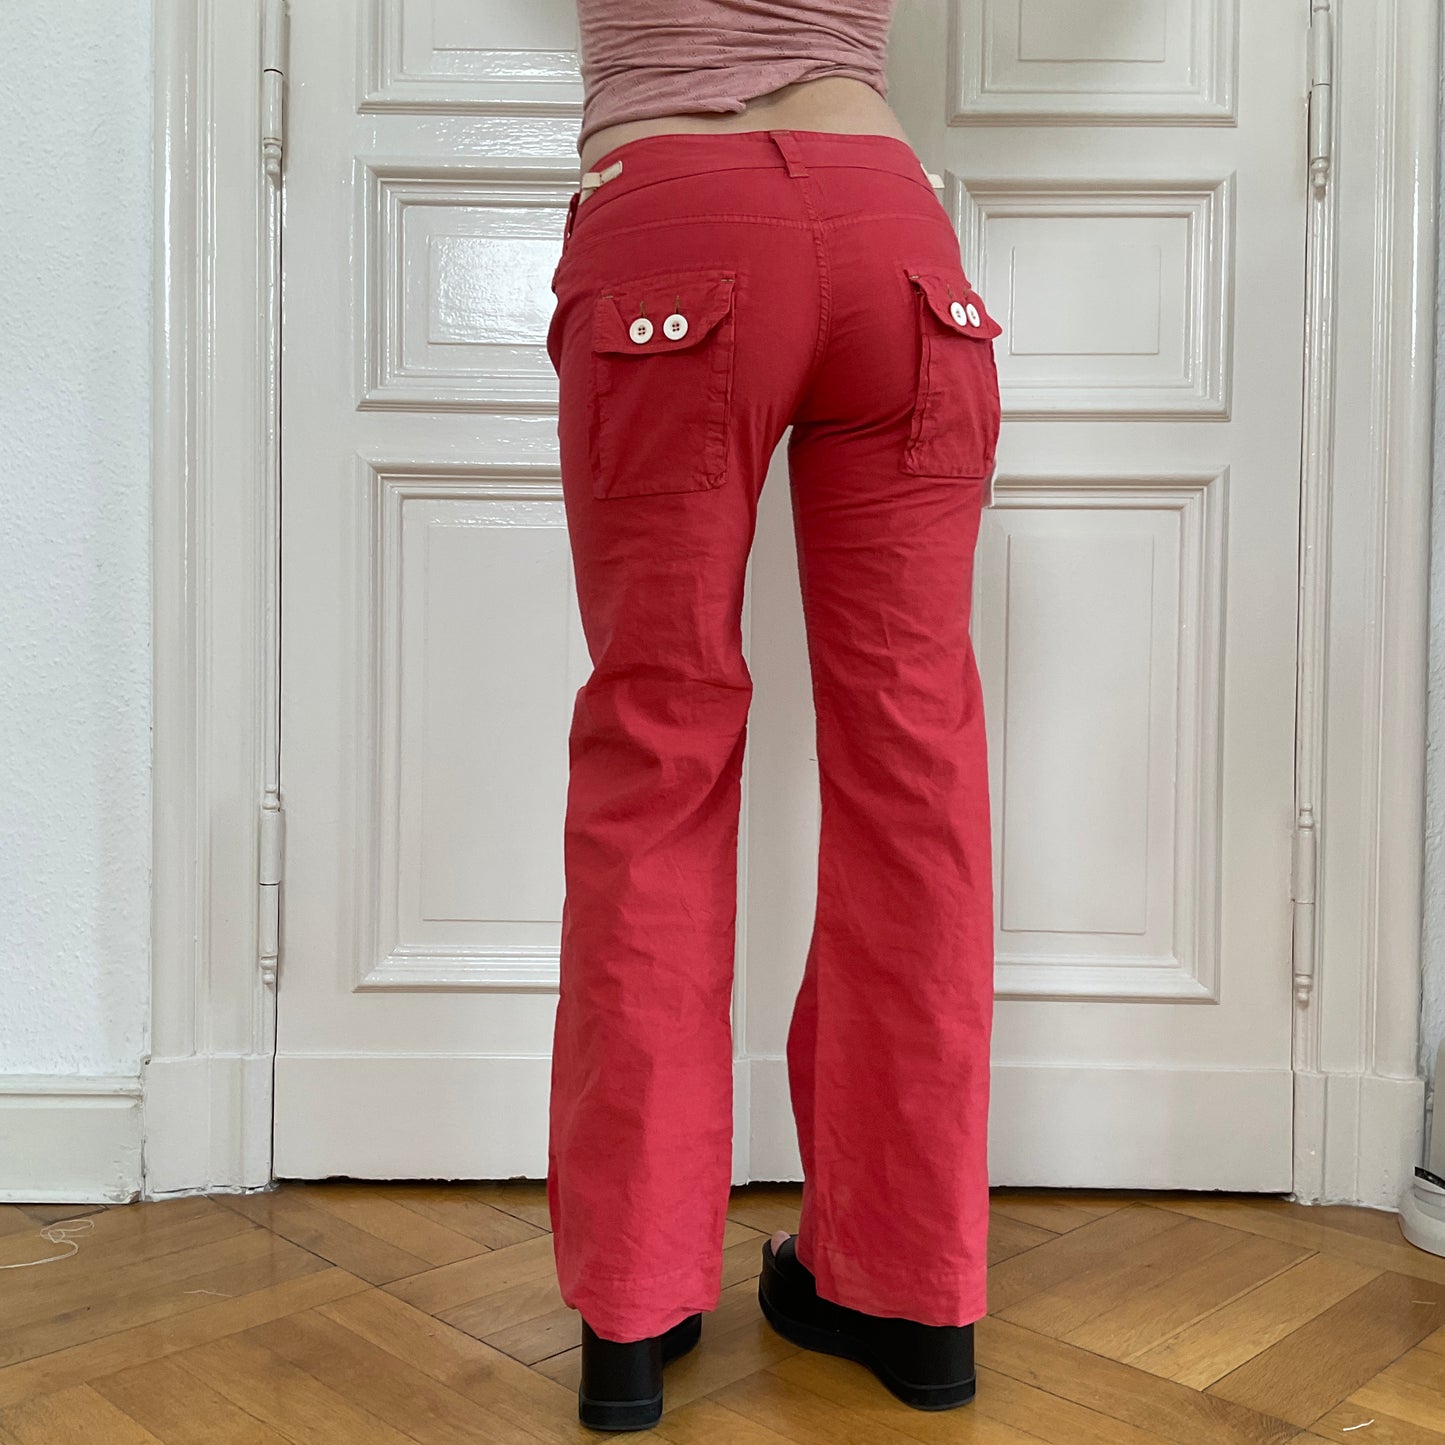 Red cargo pants